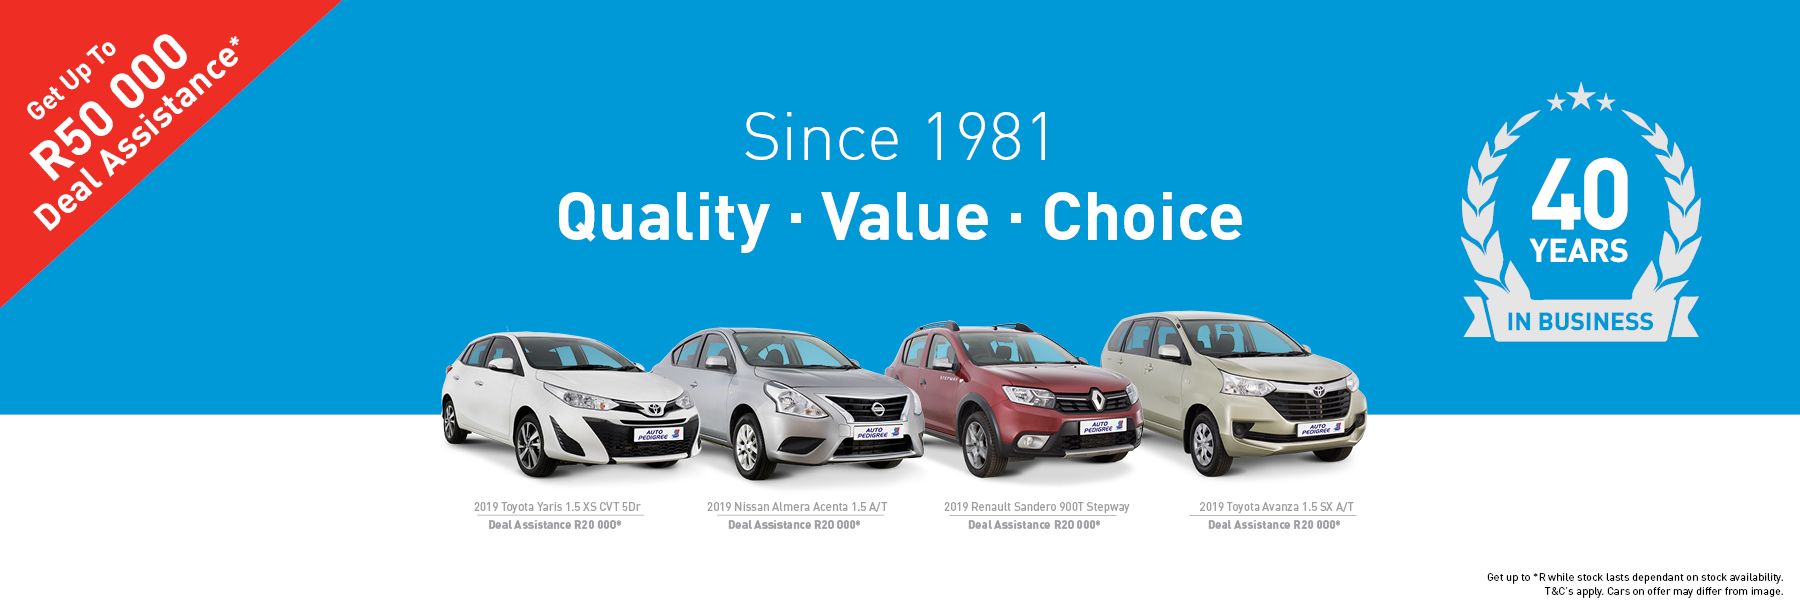 Quality Used Vehicles from Auto Pedigree â€“ Trusted for 40 Years